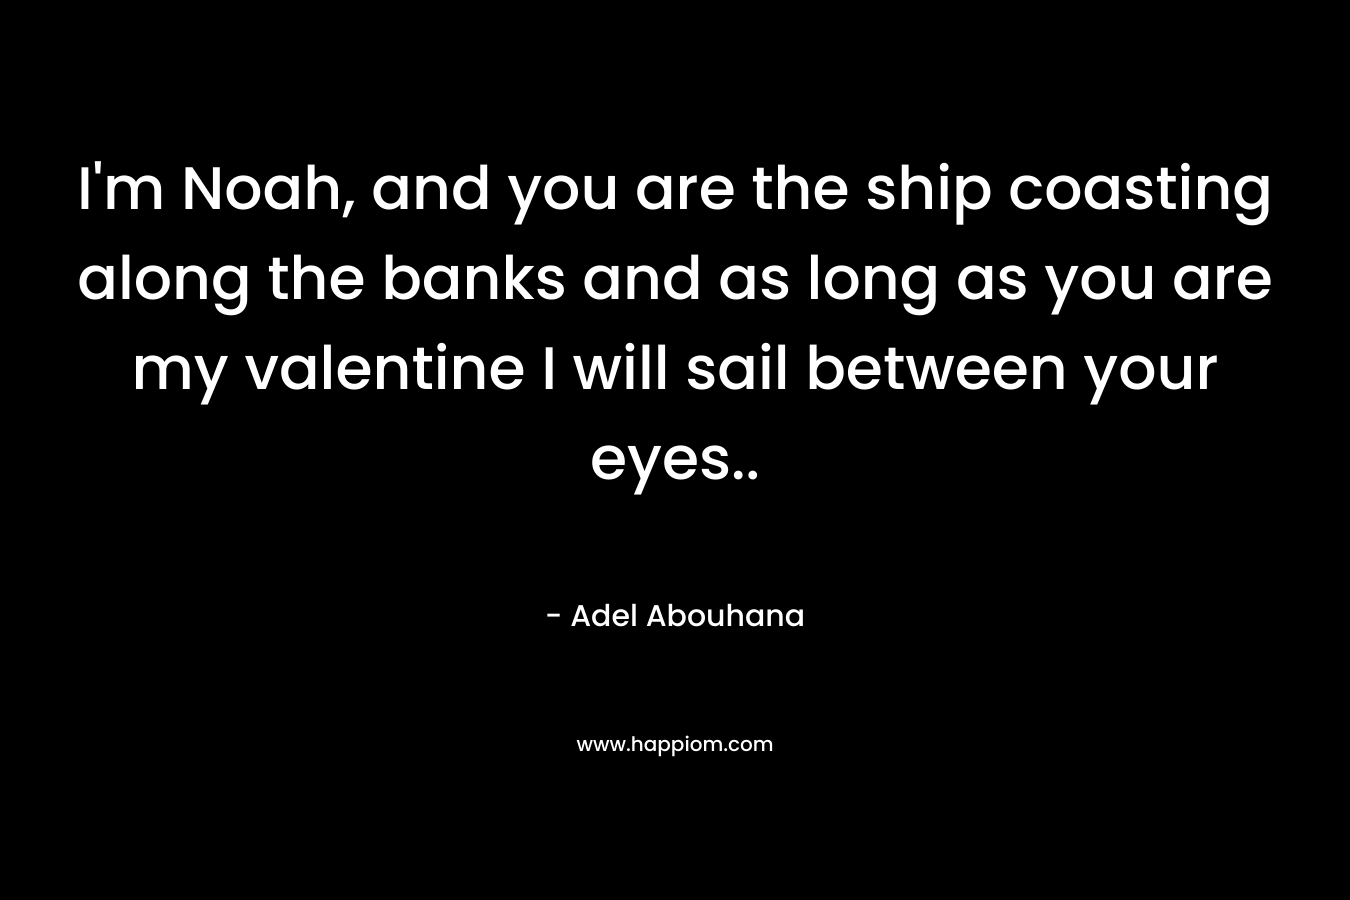 I'm Noah, and you are the ship coasting along the banks and as long as you are my valentine I will sail between your eyes..